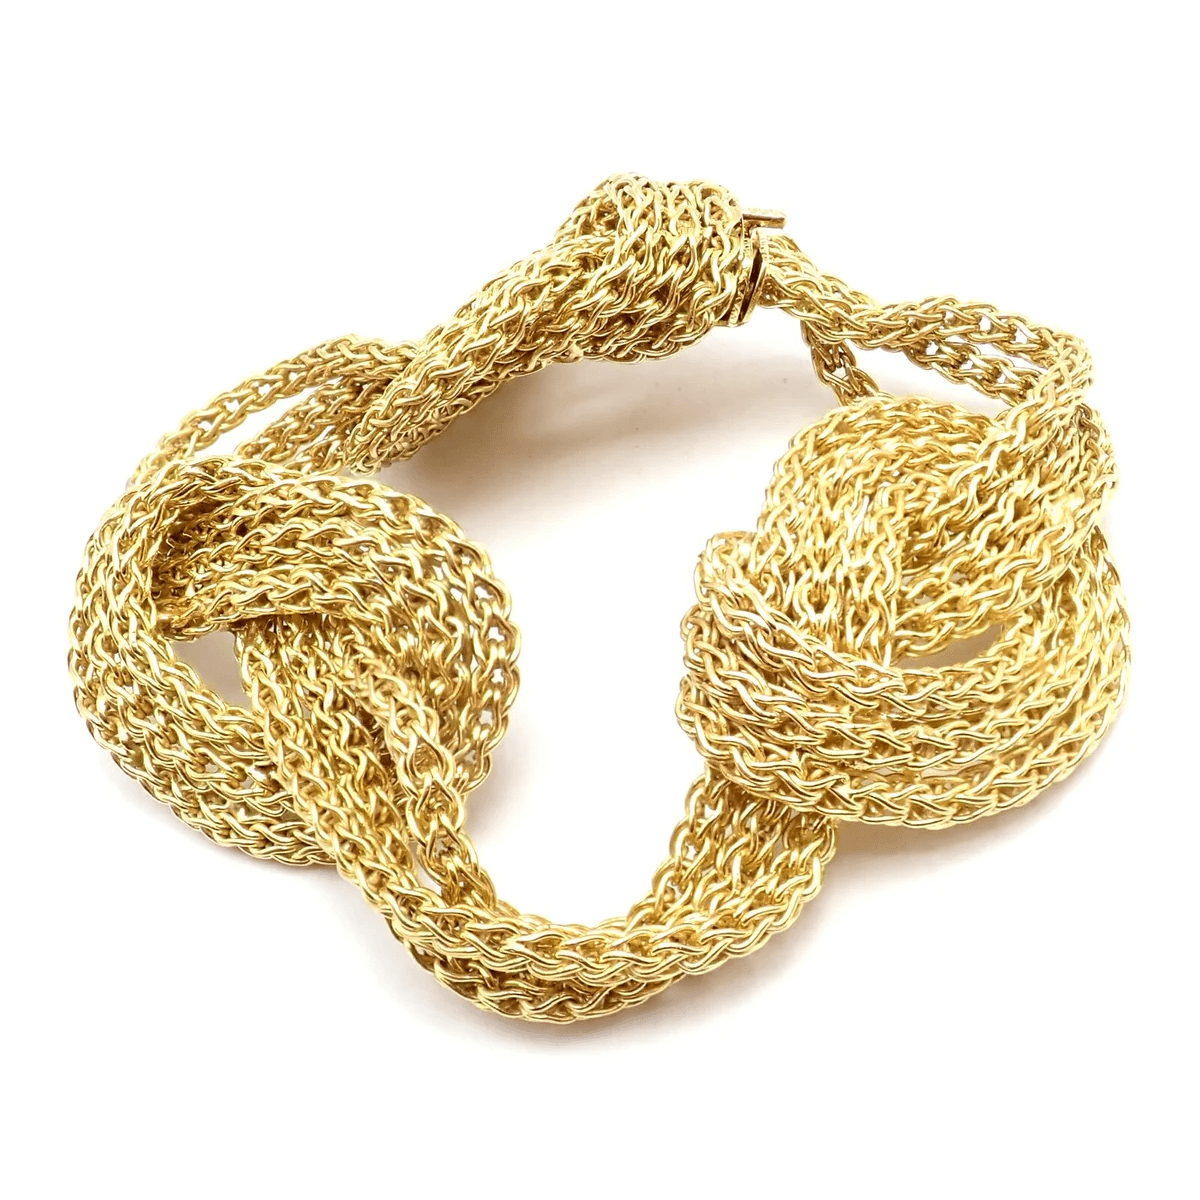 Tiffany & Co. Post-1980s 18KT Yellow Gold Woven Knot Bracelet